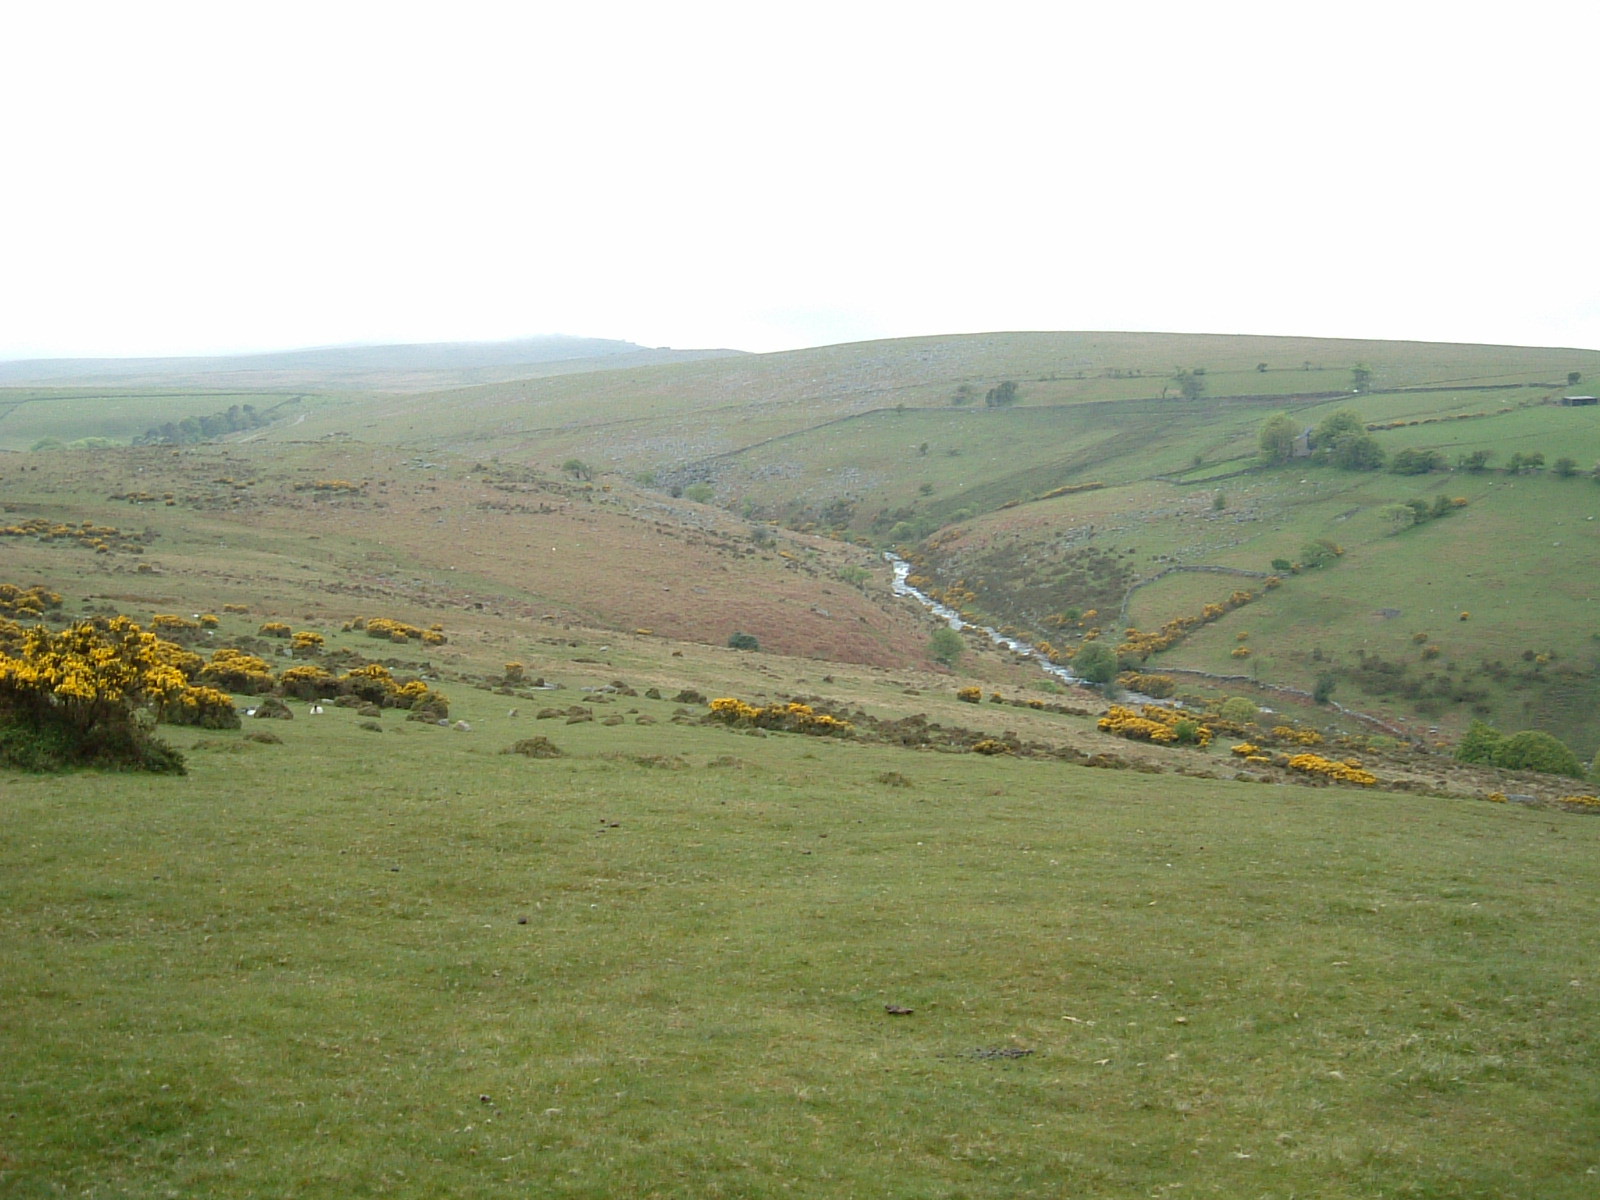 A rather miserable Dartmoor as seen from the Tarka Trail